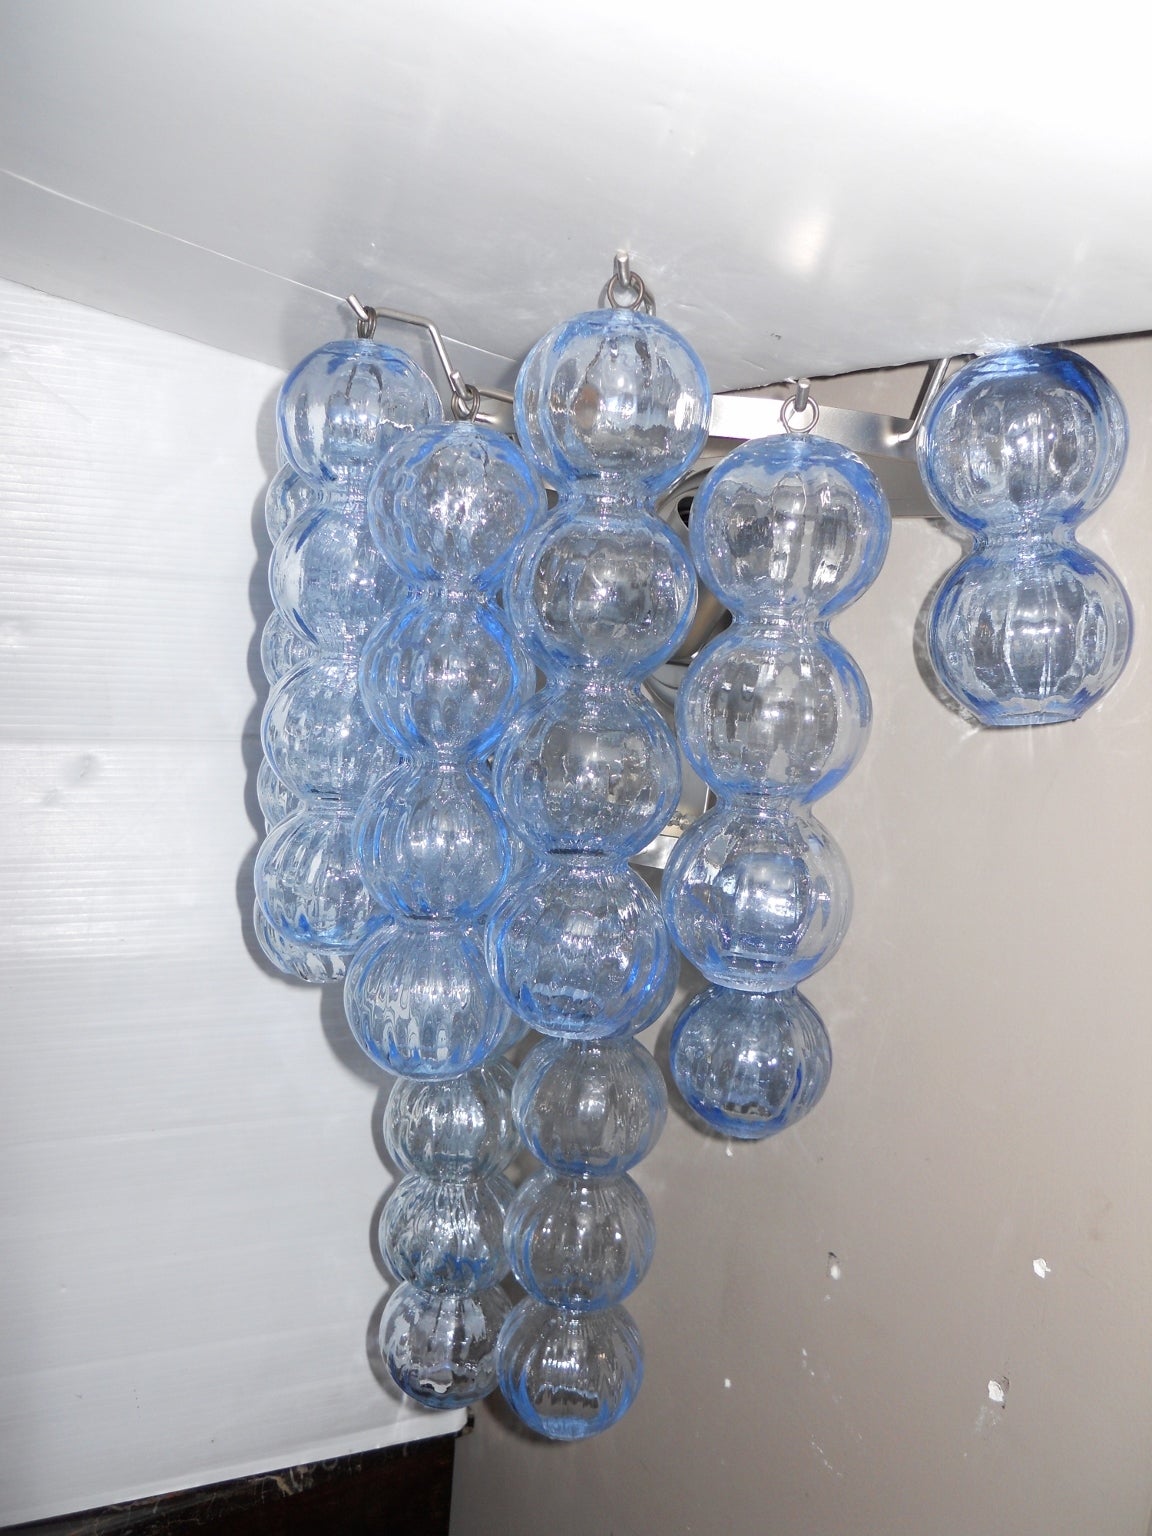 A pair of large blue Murano glass ball sconces. Each sconce has a chrome frame and two lights. Price shown is for a pair. There are four pairs available.